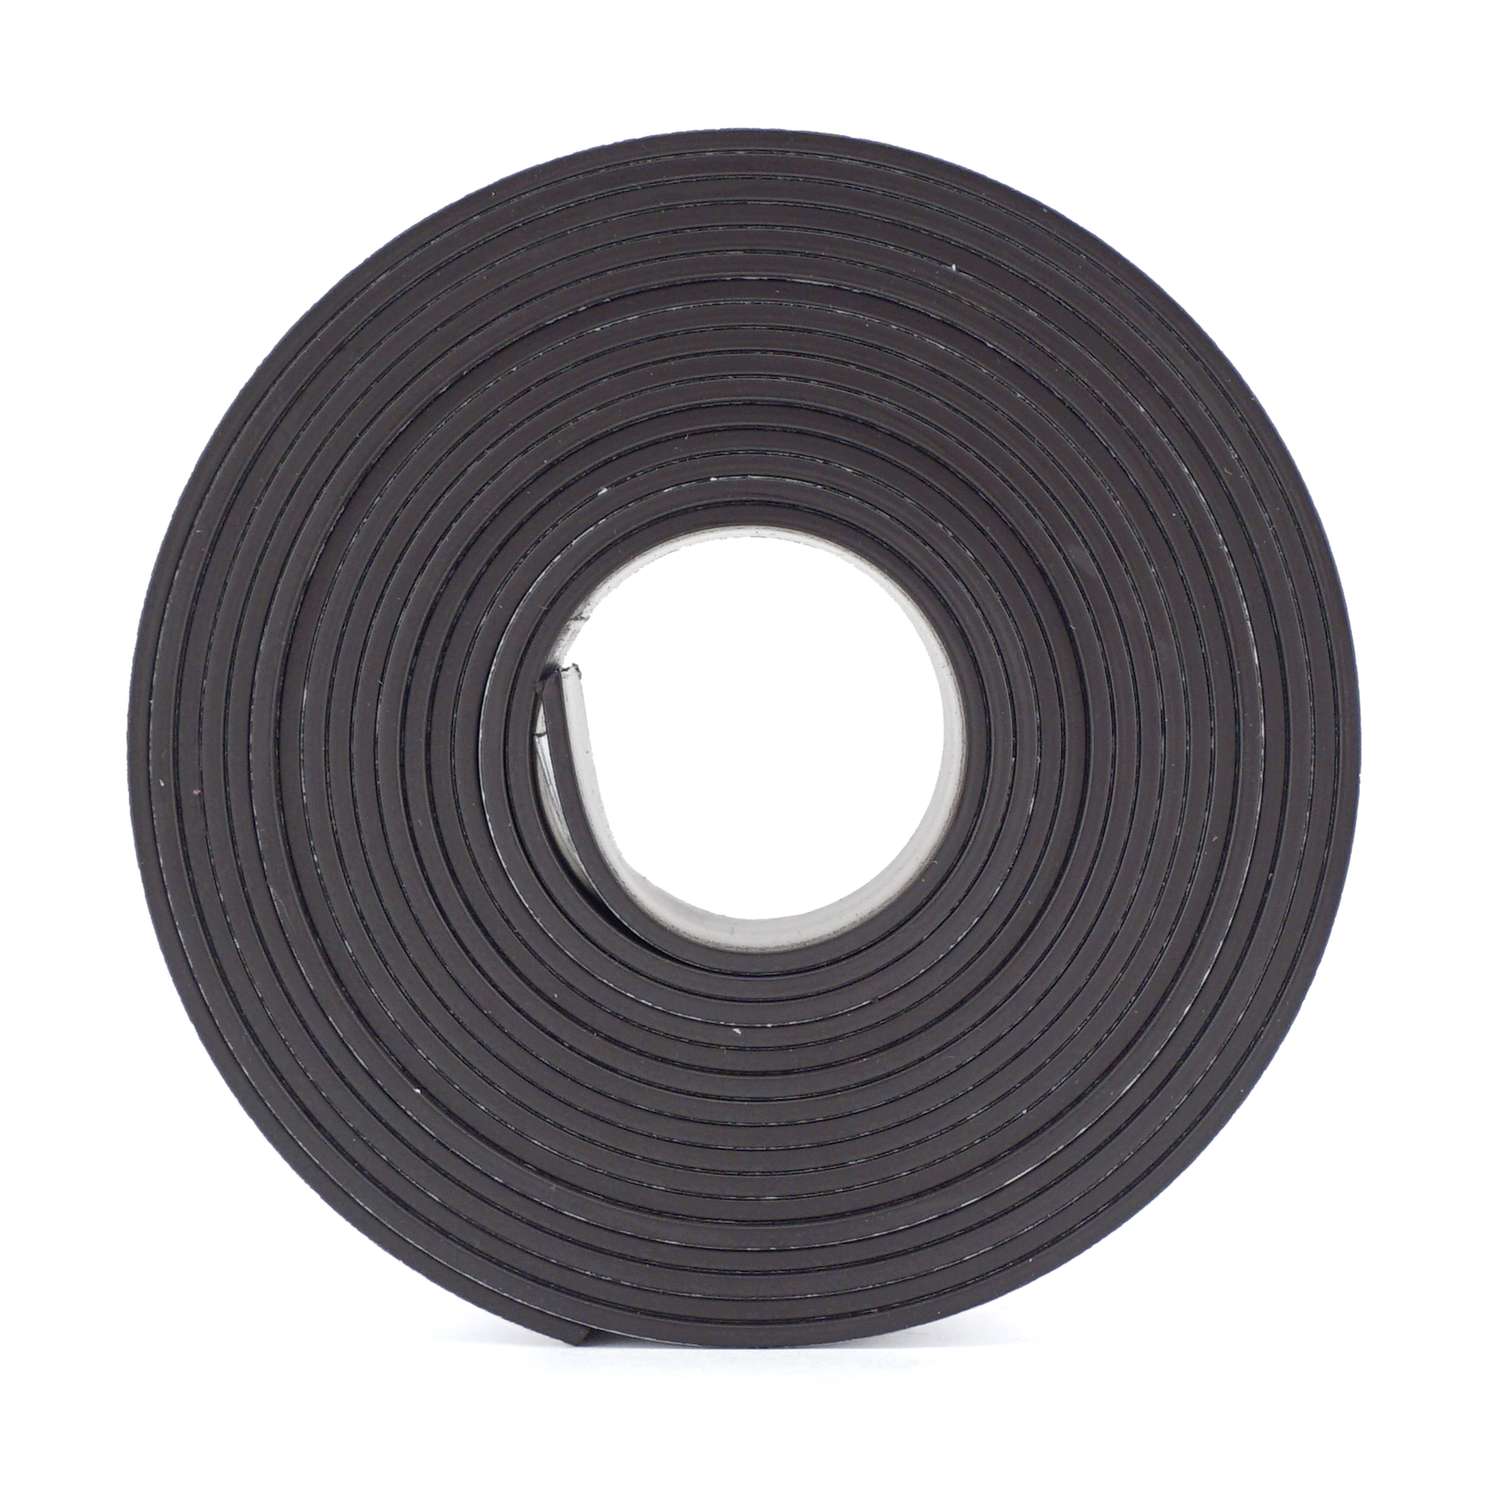 1 Adhesive Magnetic Strips - Discount Magnet